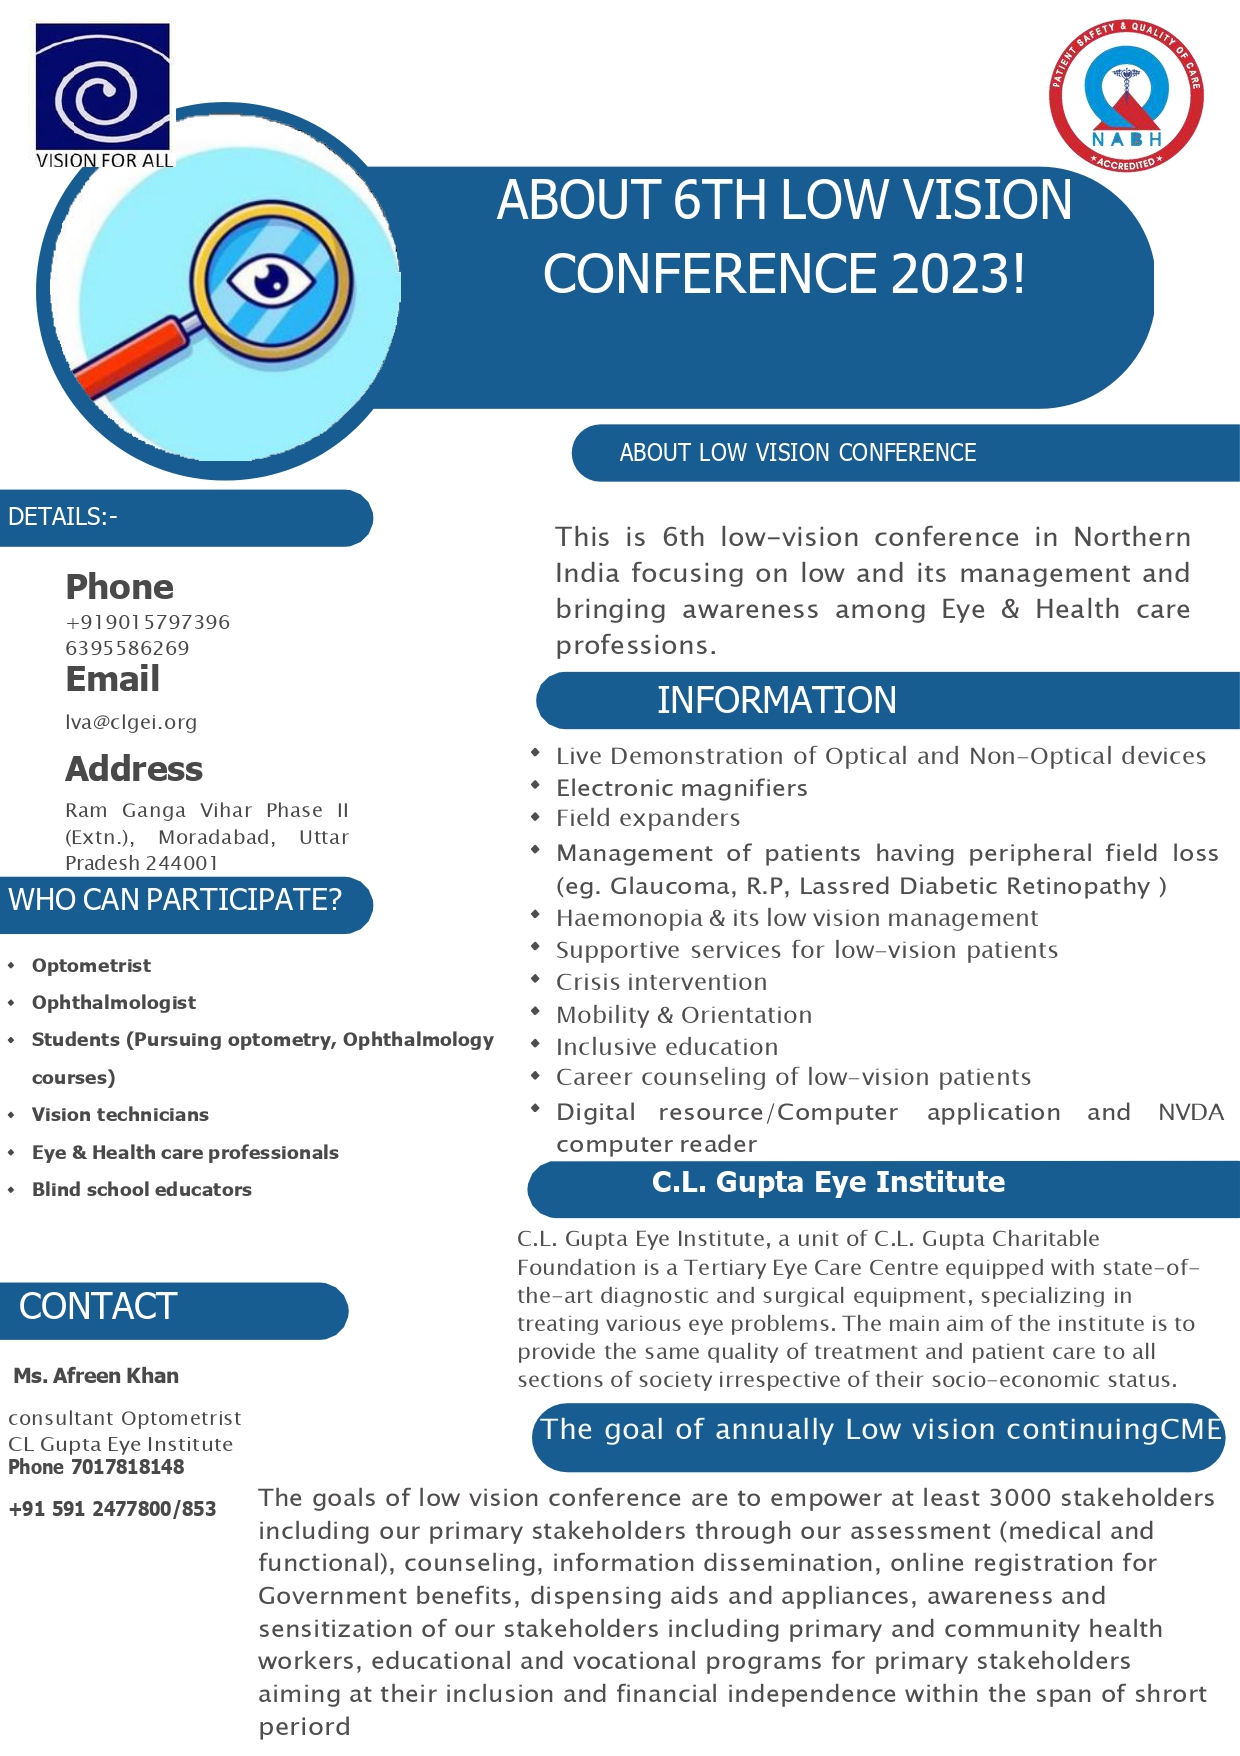 26 February (6th- Conference) National Low vision conference 2023